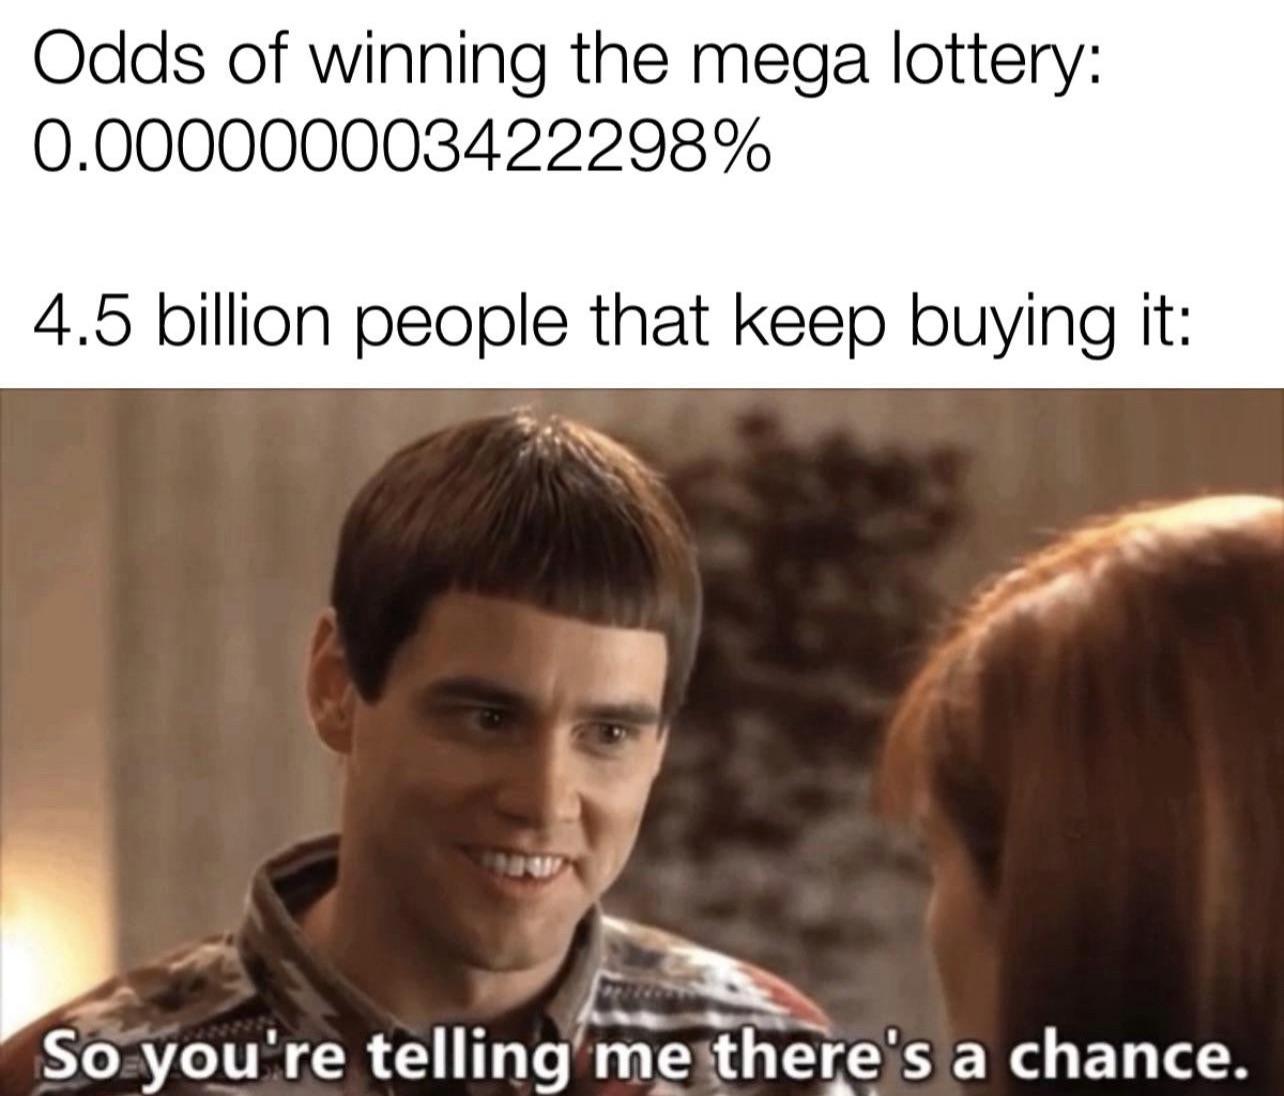 dank memes - like those odds memes - Odds of winning the mega lottery 0.000000003422298% 4.5 billion people that keep buying it So you're telling me there's a chance.